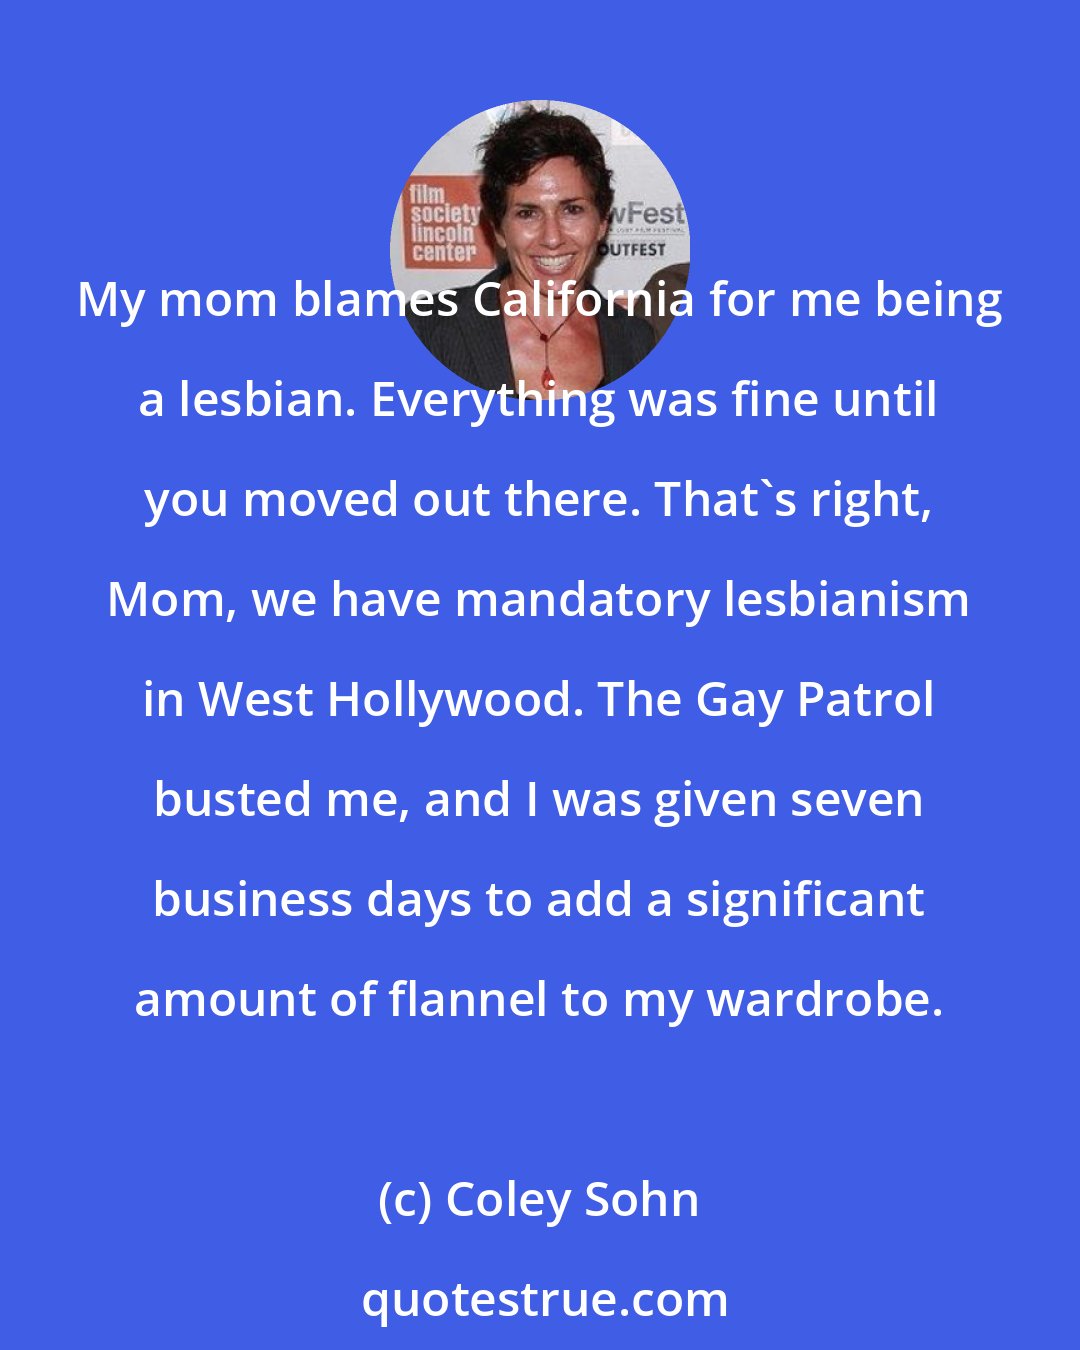 Coley Sohn: My mom blames California for me being a lesbian. Everything was fine until you moved out there. That's right, Mom, we have mandatory lesbianism in West Hollywood. The Gay Patrol busted me, and I was given seven business days to add a significant amount of flannel to my wardrobe.